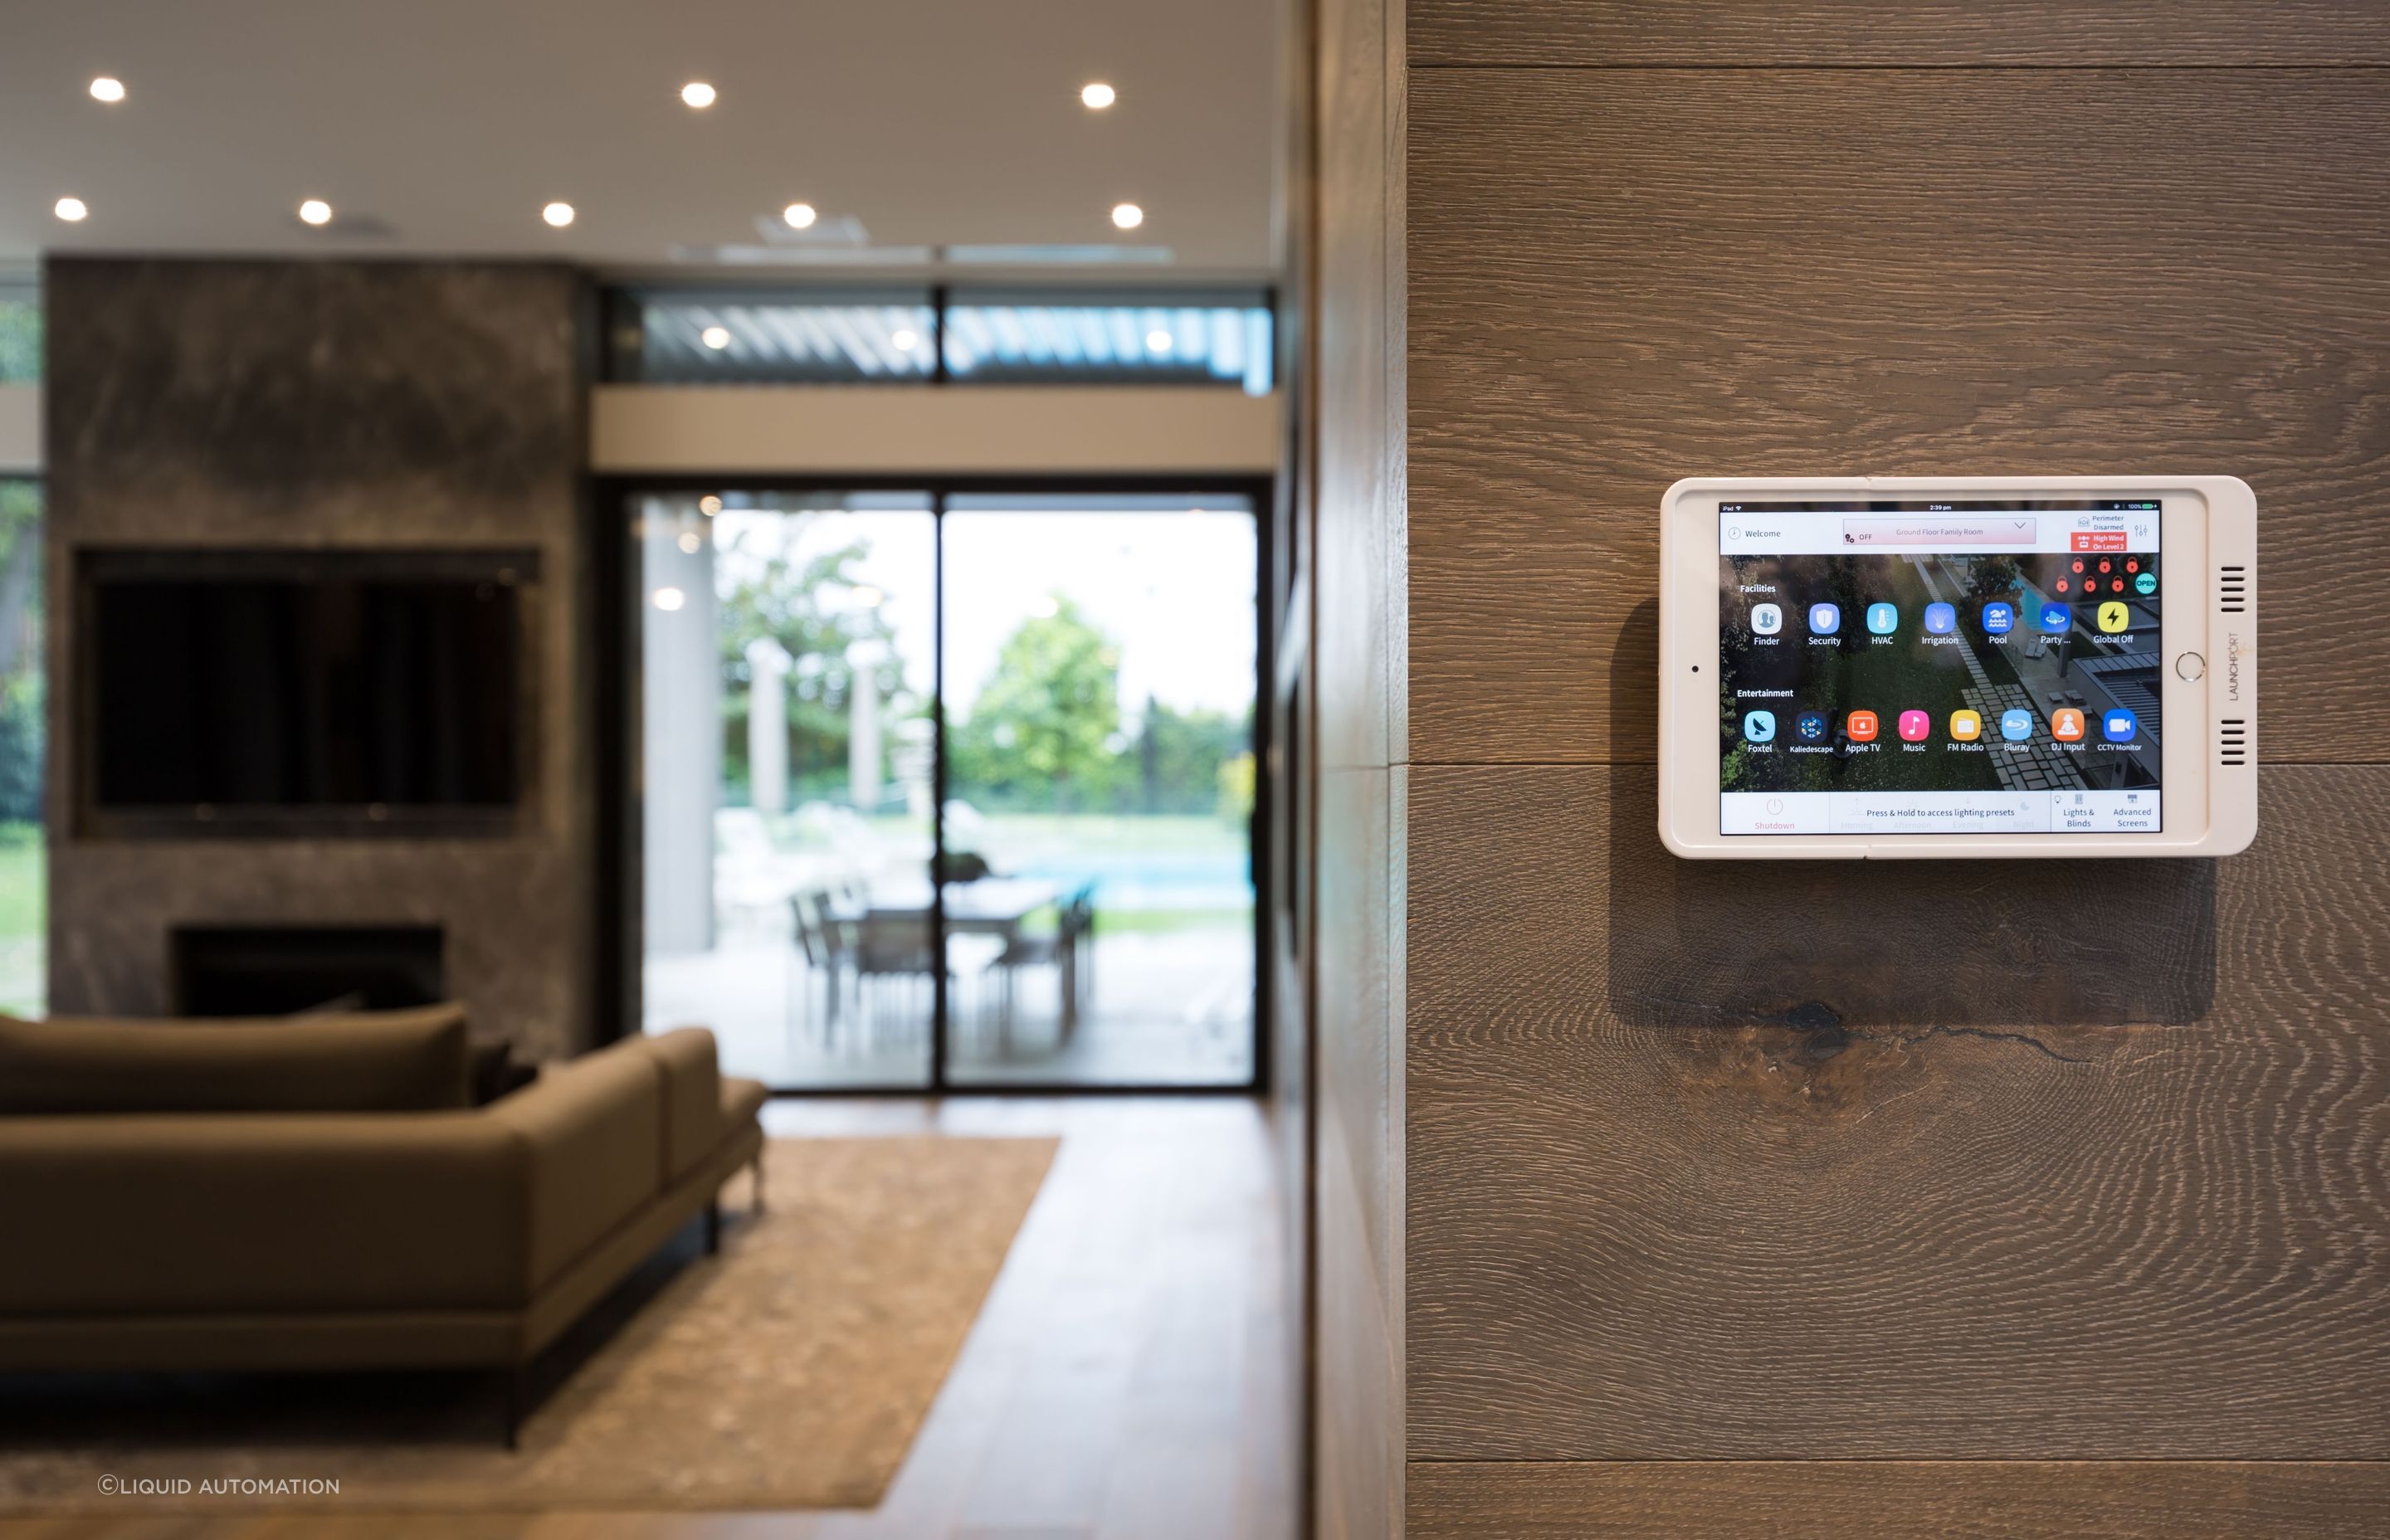 The 'internet of things' has great potential to connect more elements of the home to a central control system.